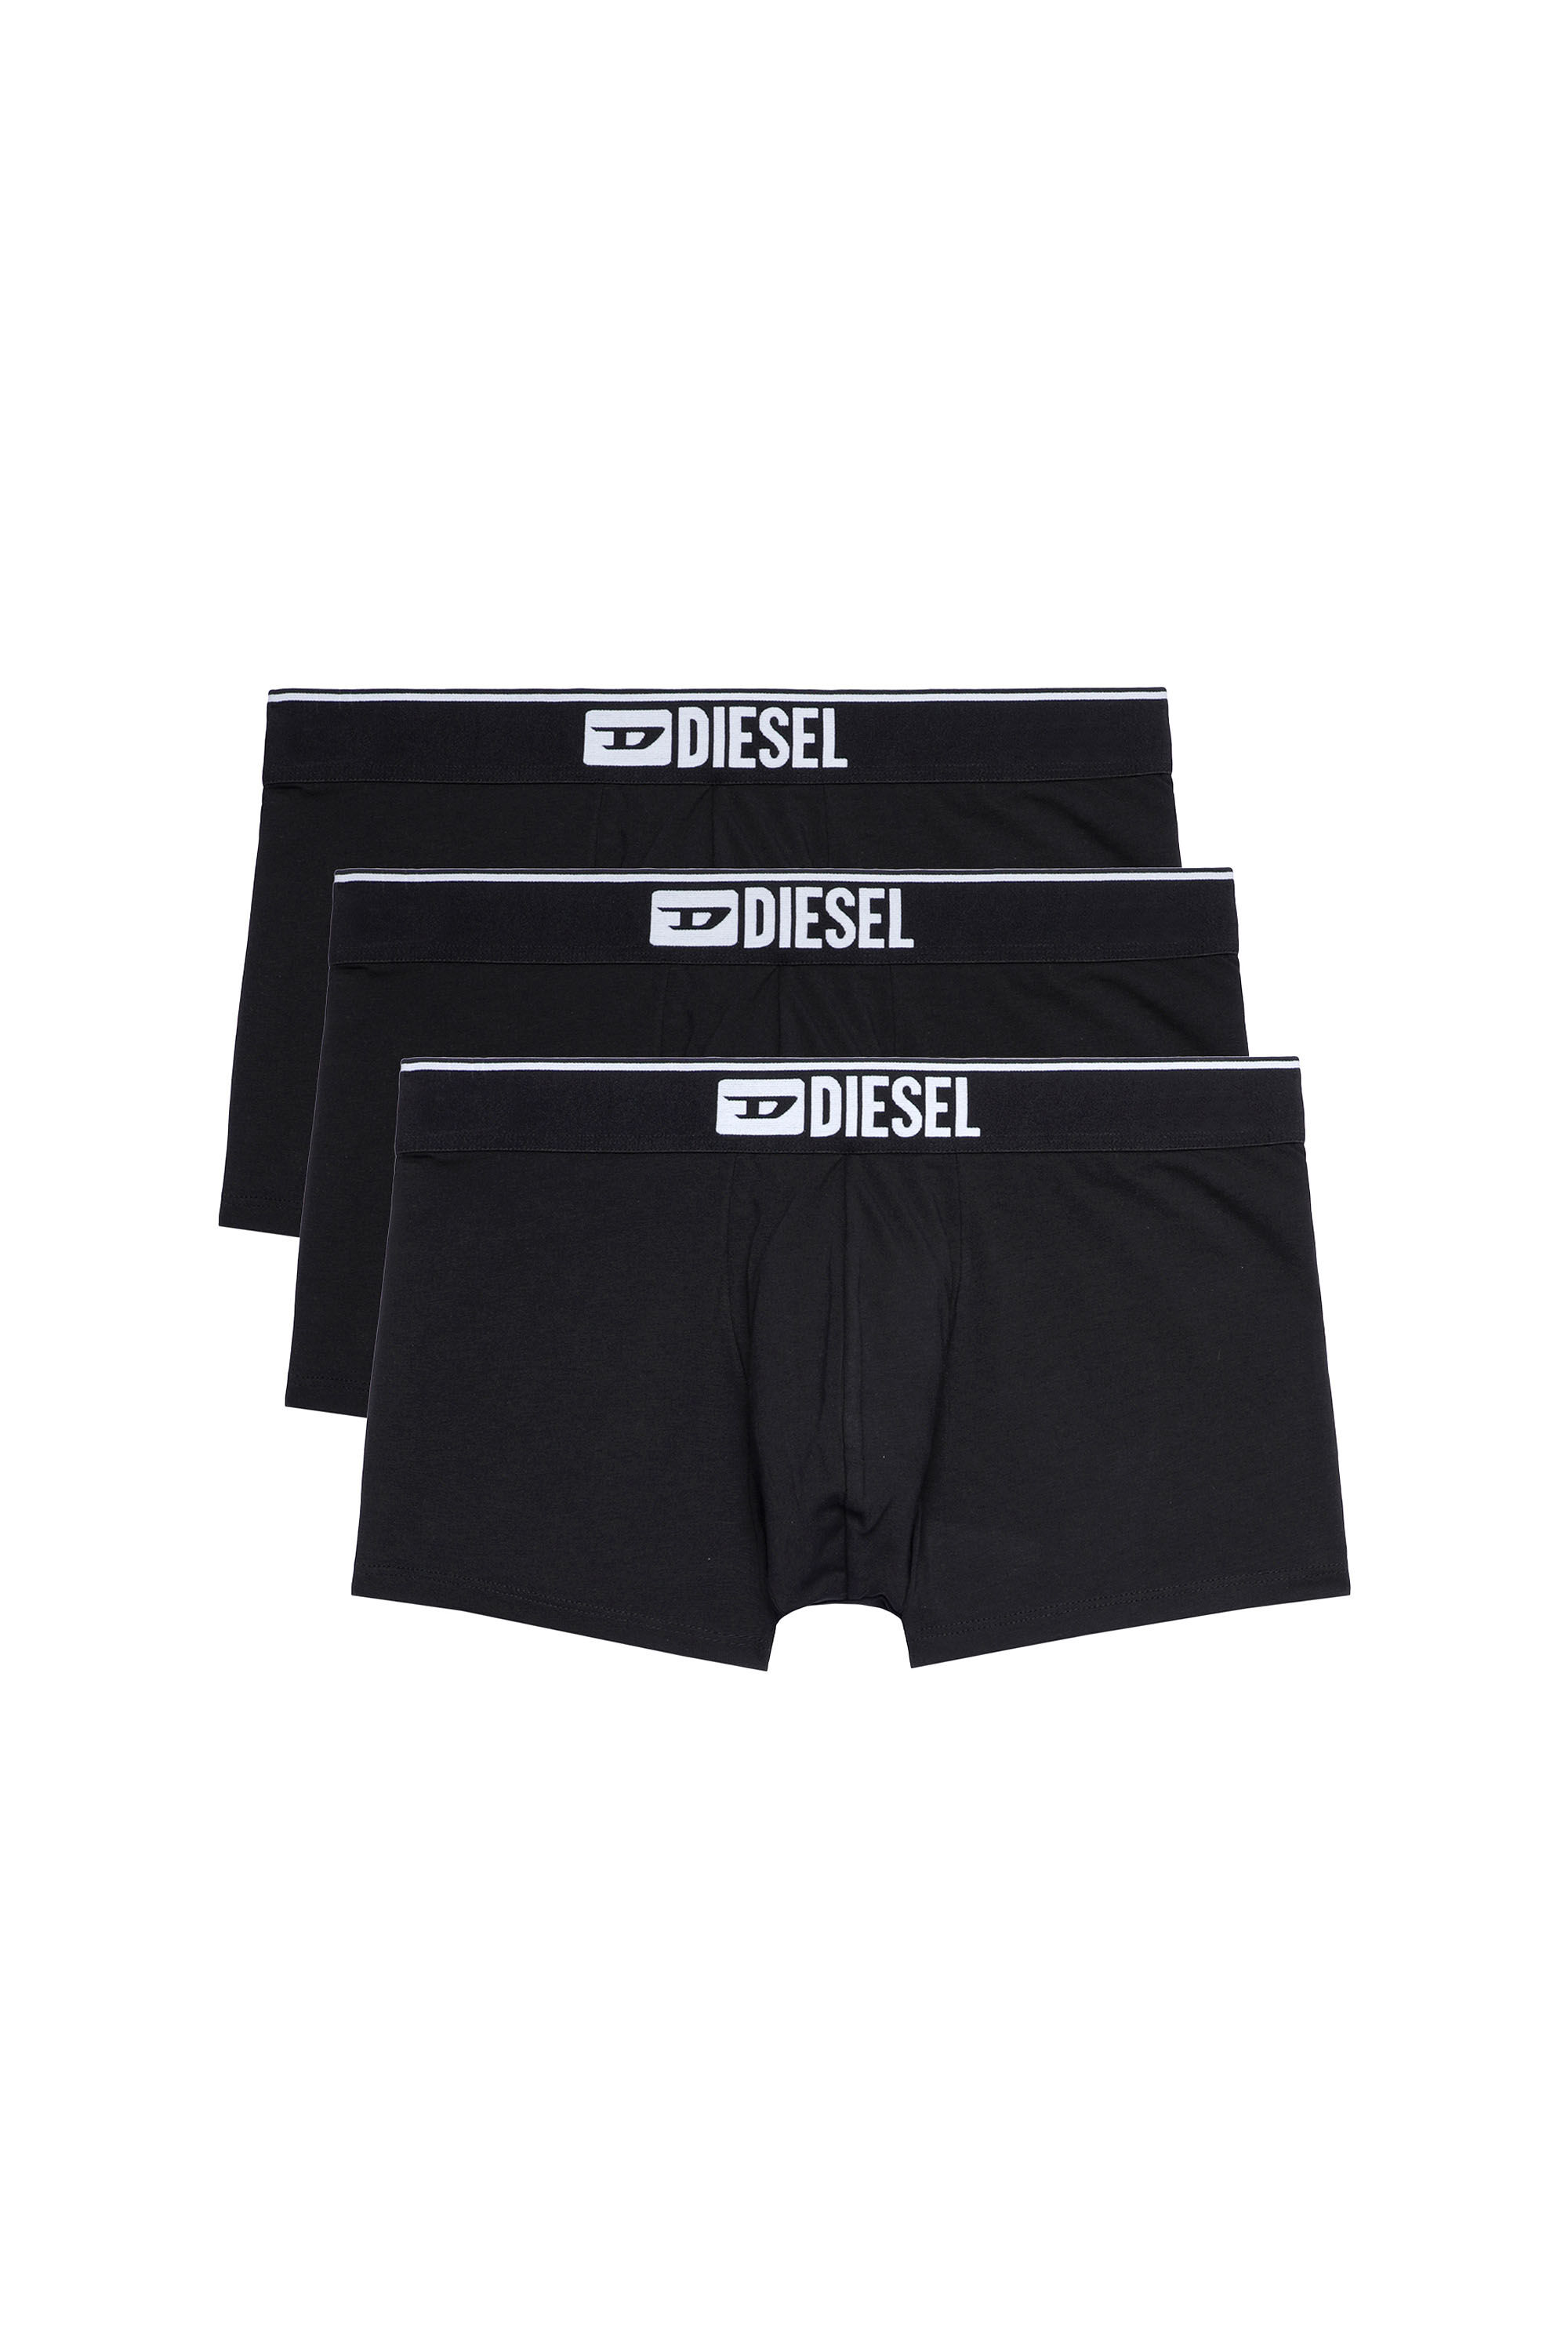 SKINY briefs 3 pack in greyblueblack selection